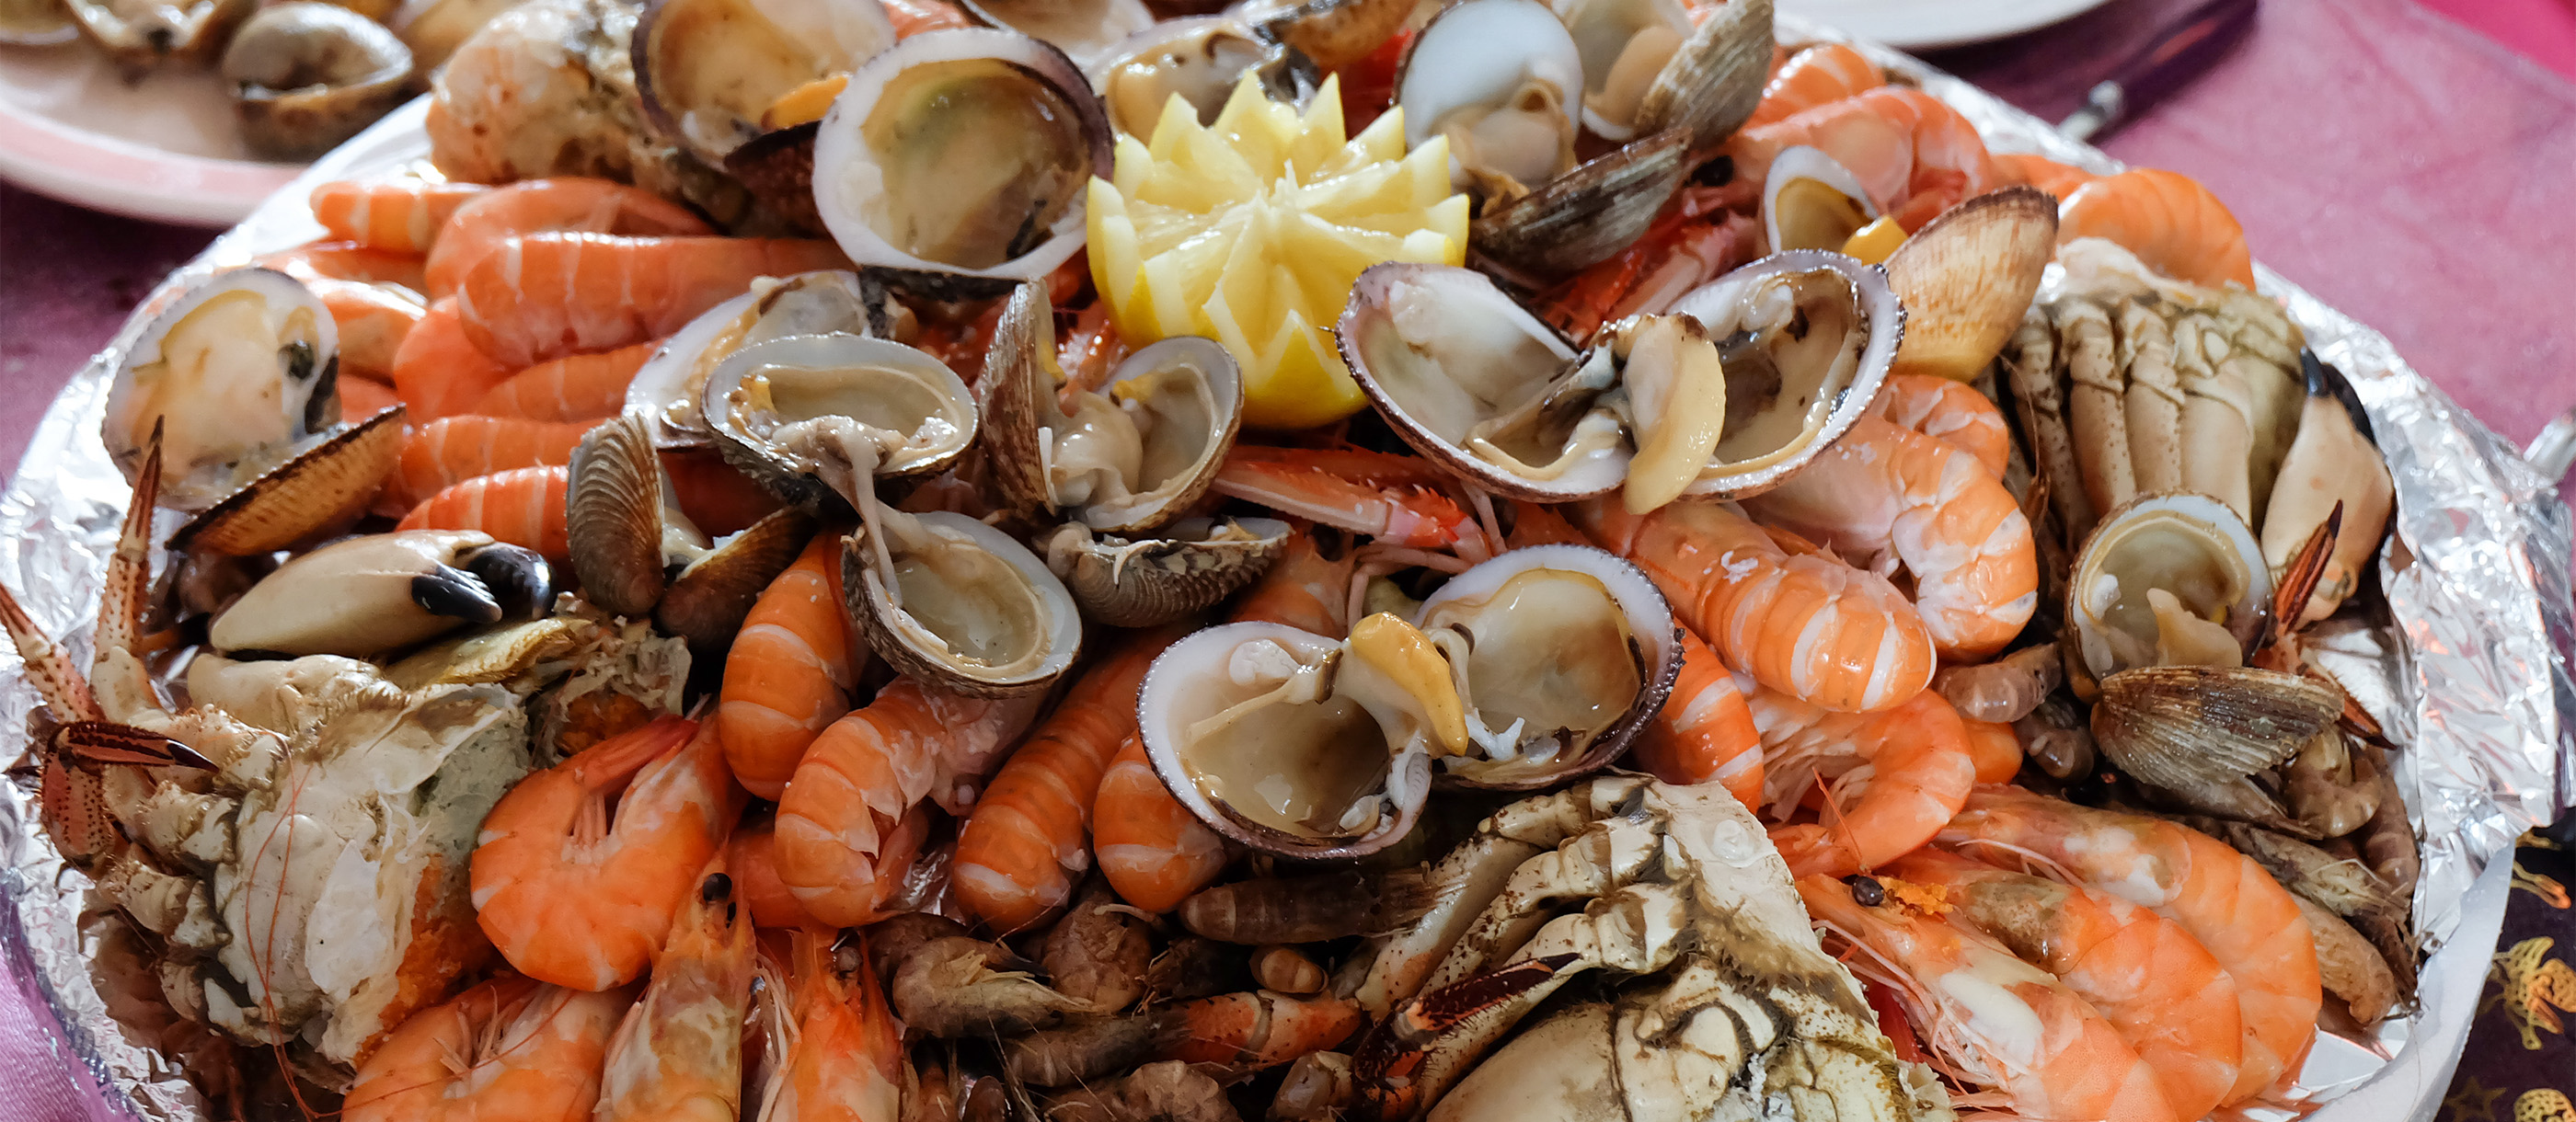 Plateau de Fruits de Mer | Traditional Seafood From France, Western Europe